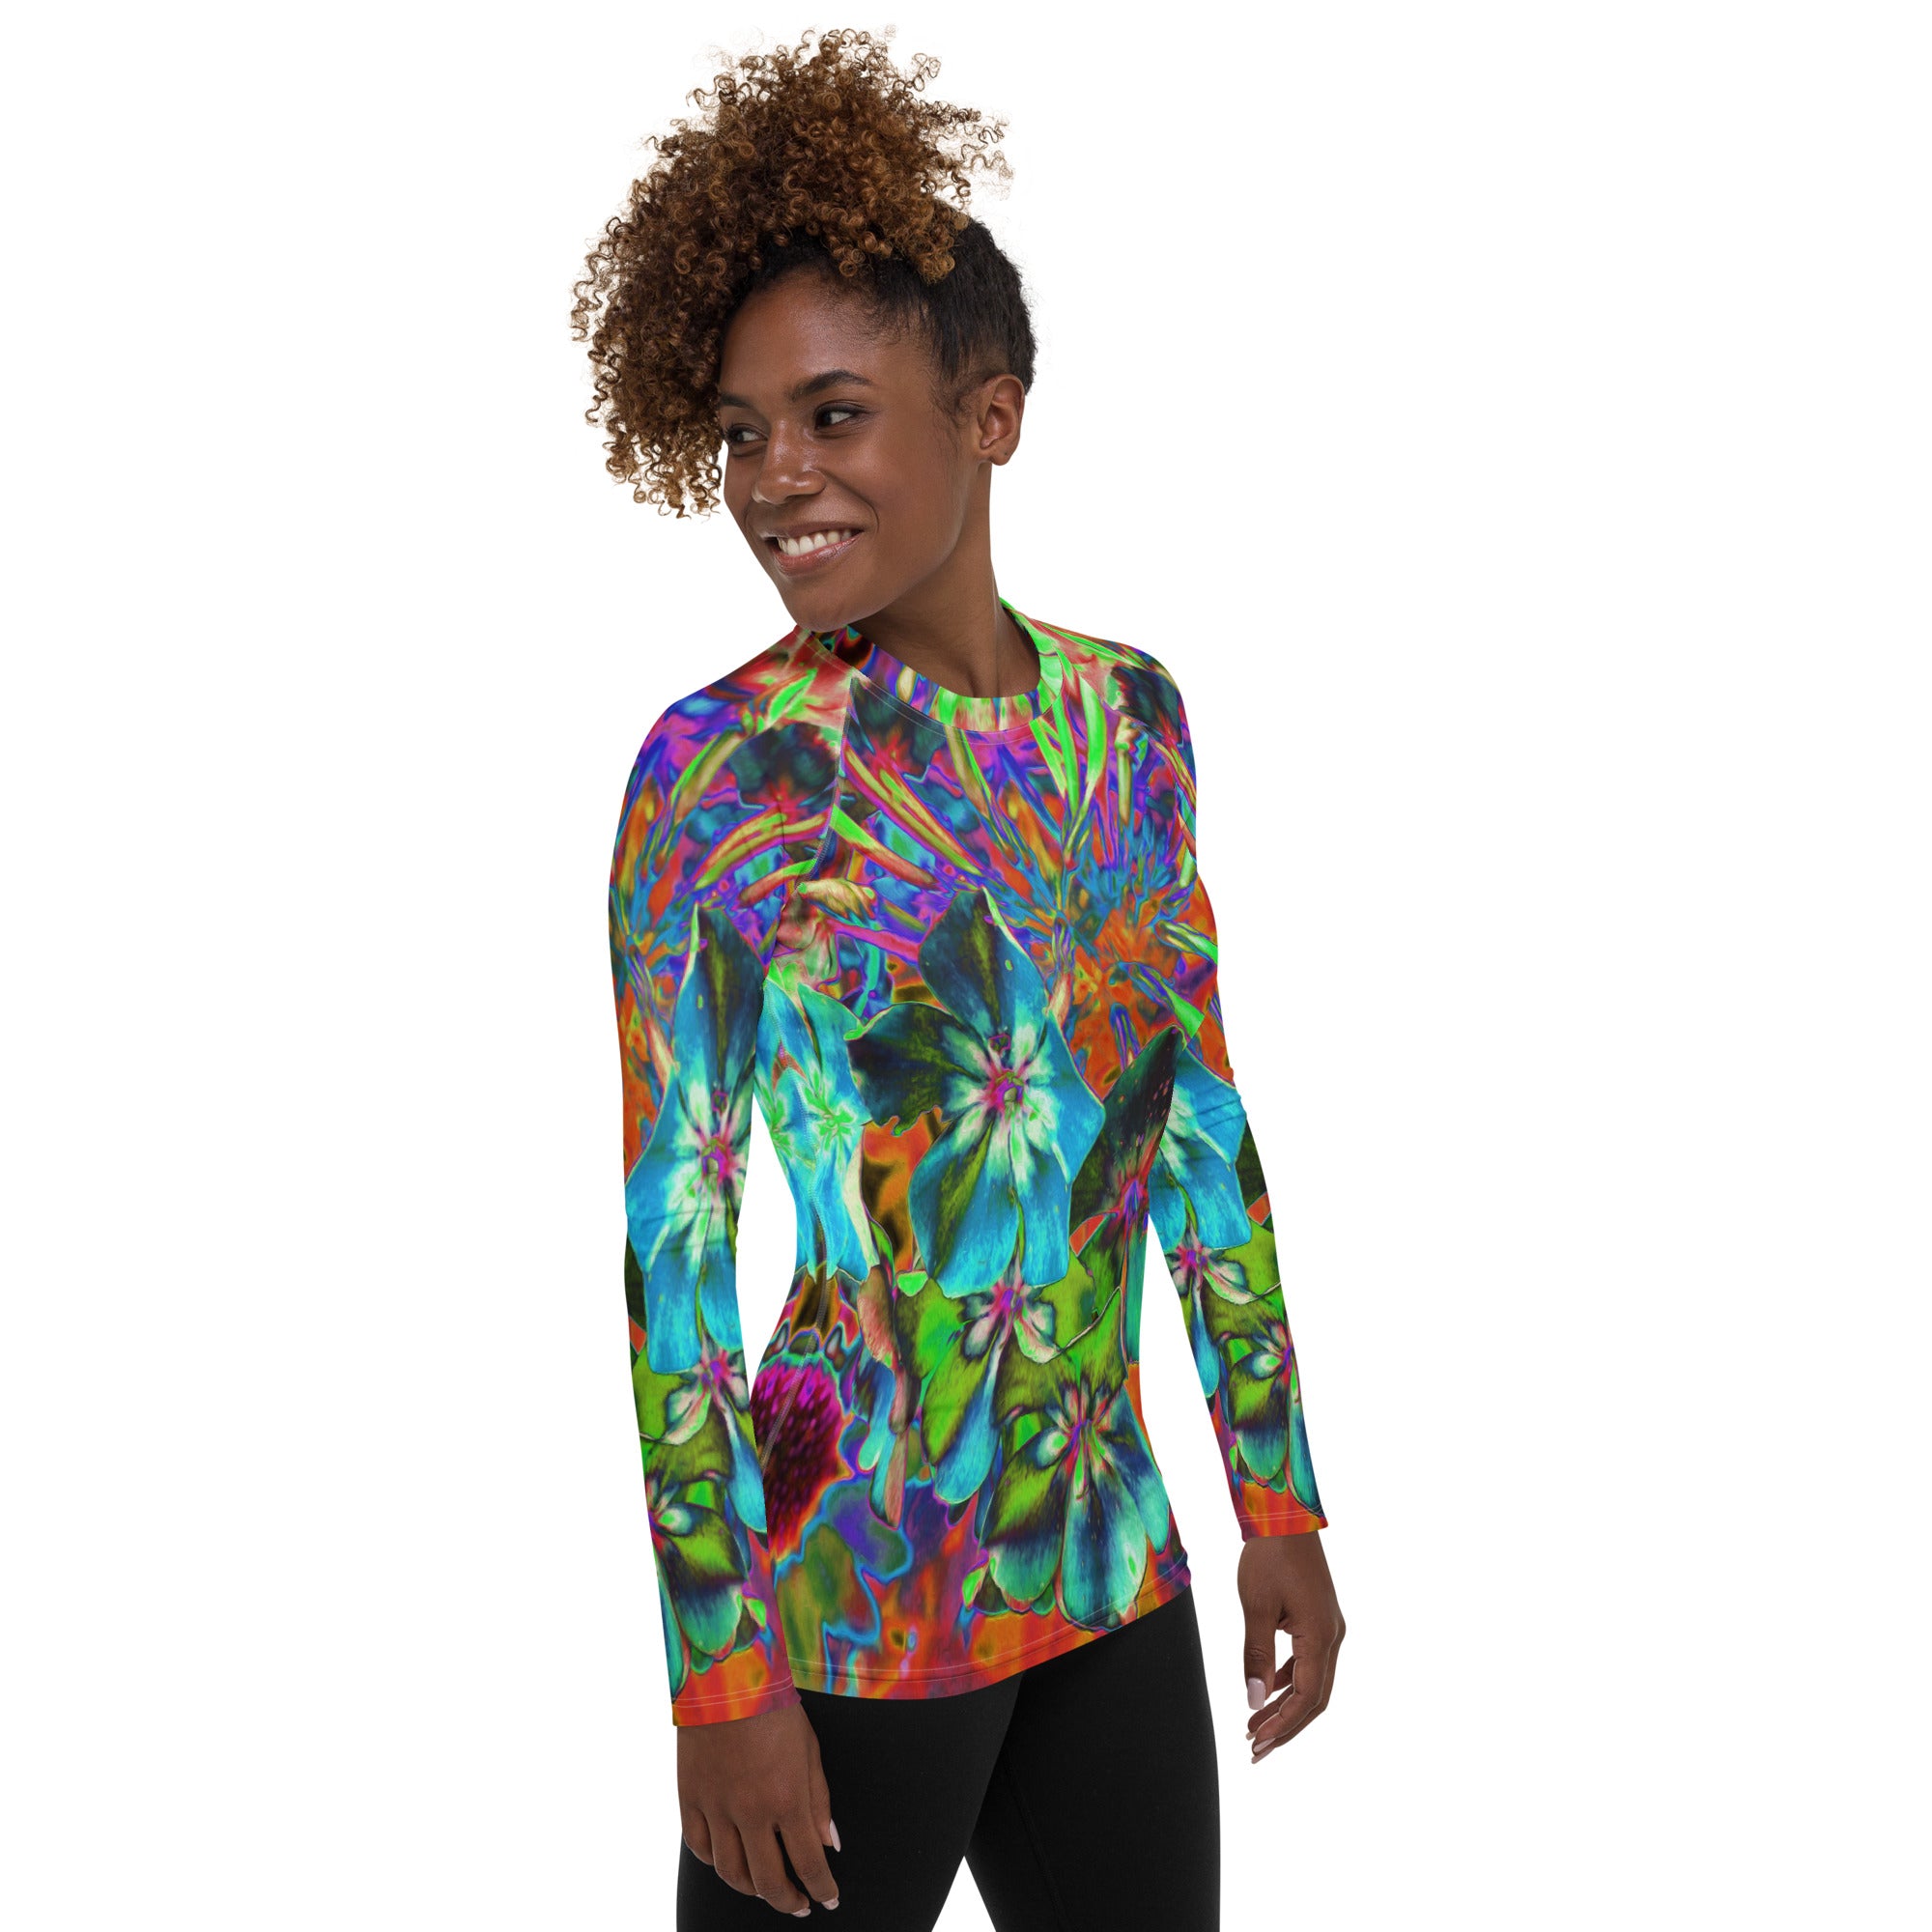 Women's Rash Guard Shirts, Blooming Abstract Blue and Lime Green Flower